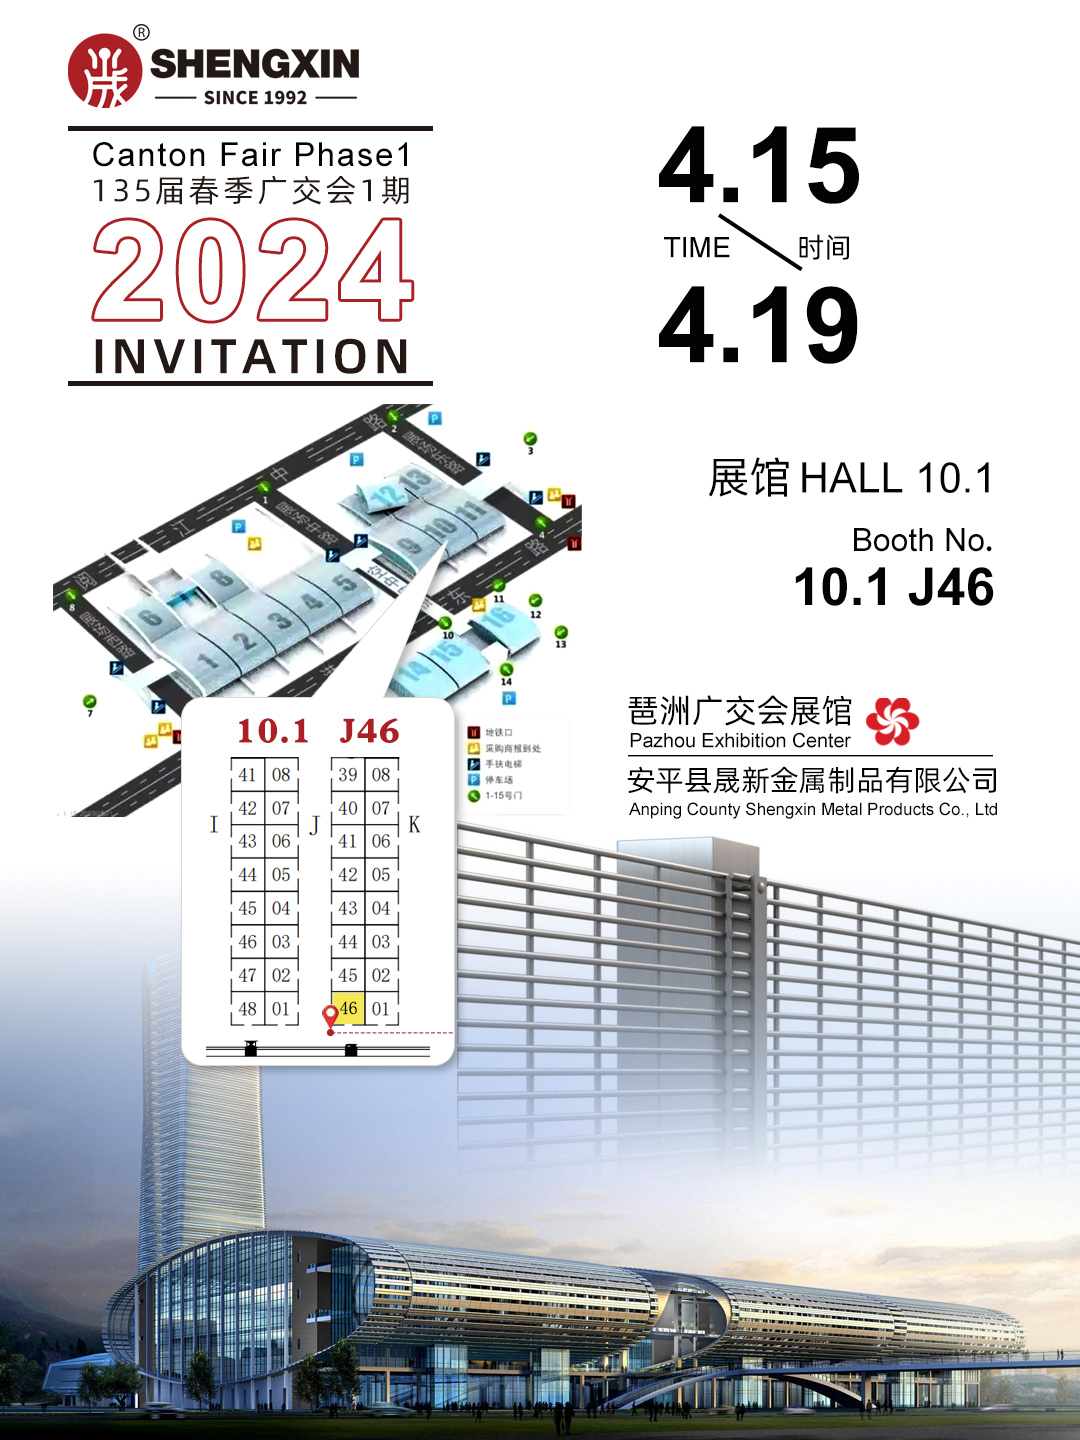 Welcome to visit us at the 135th Canton Fair 10.1 J46